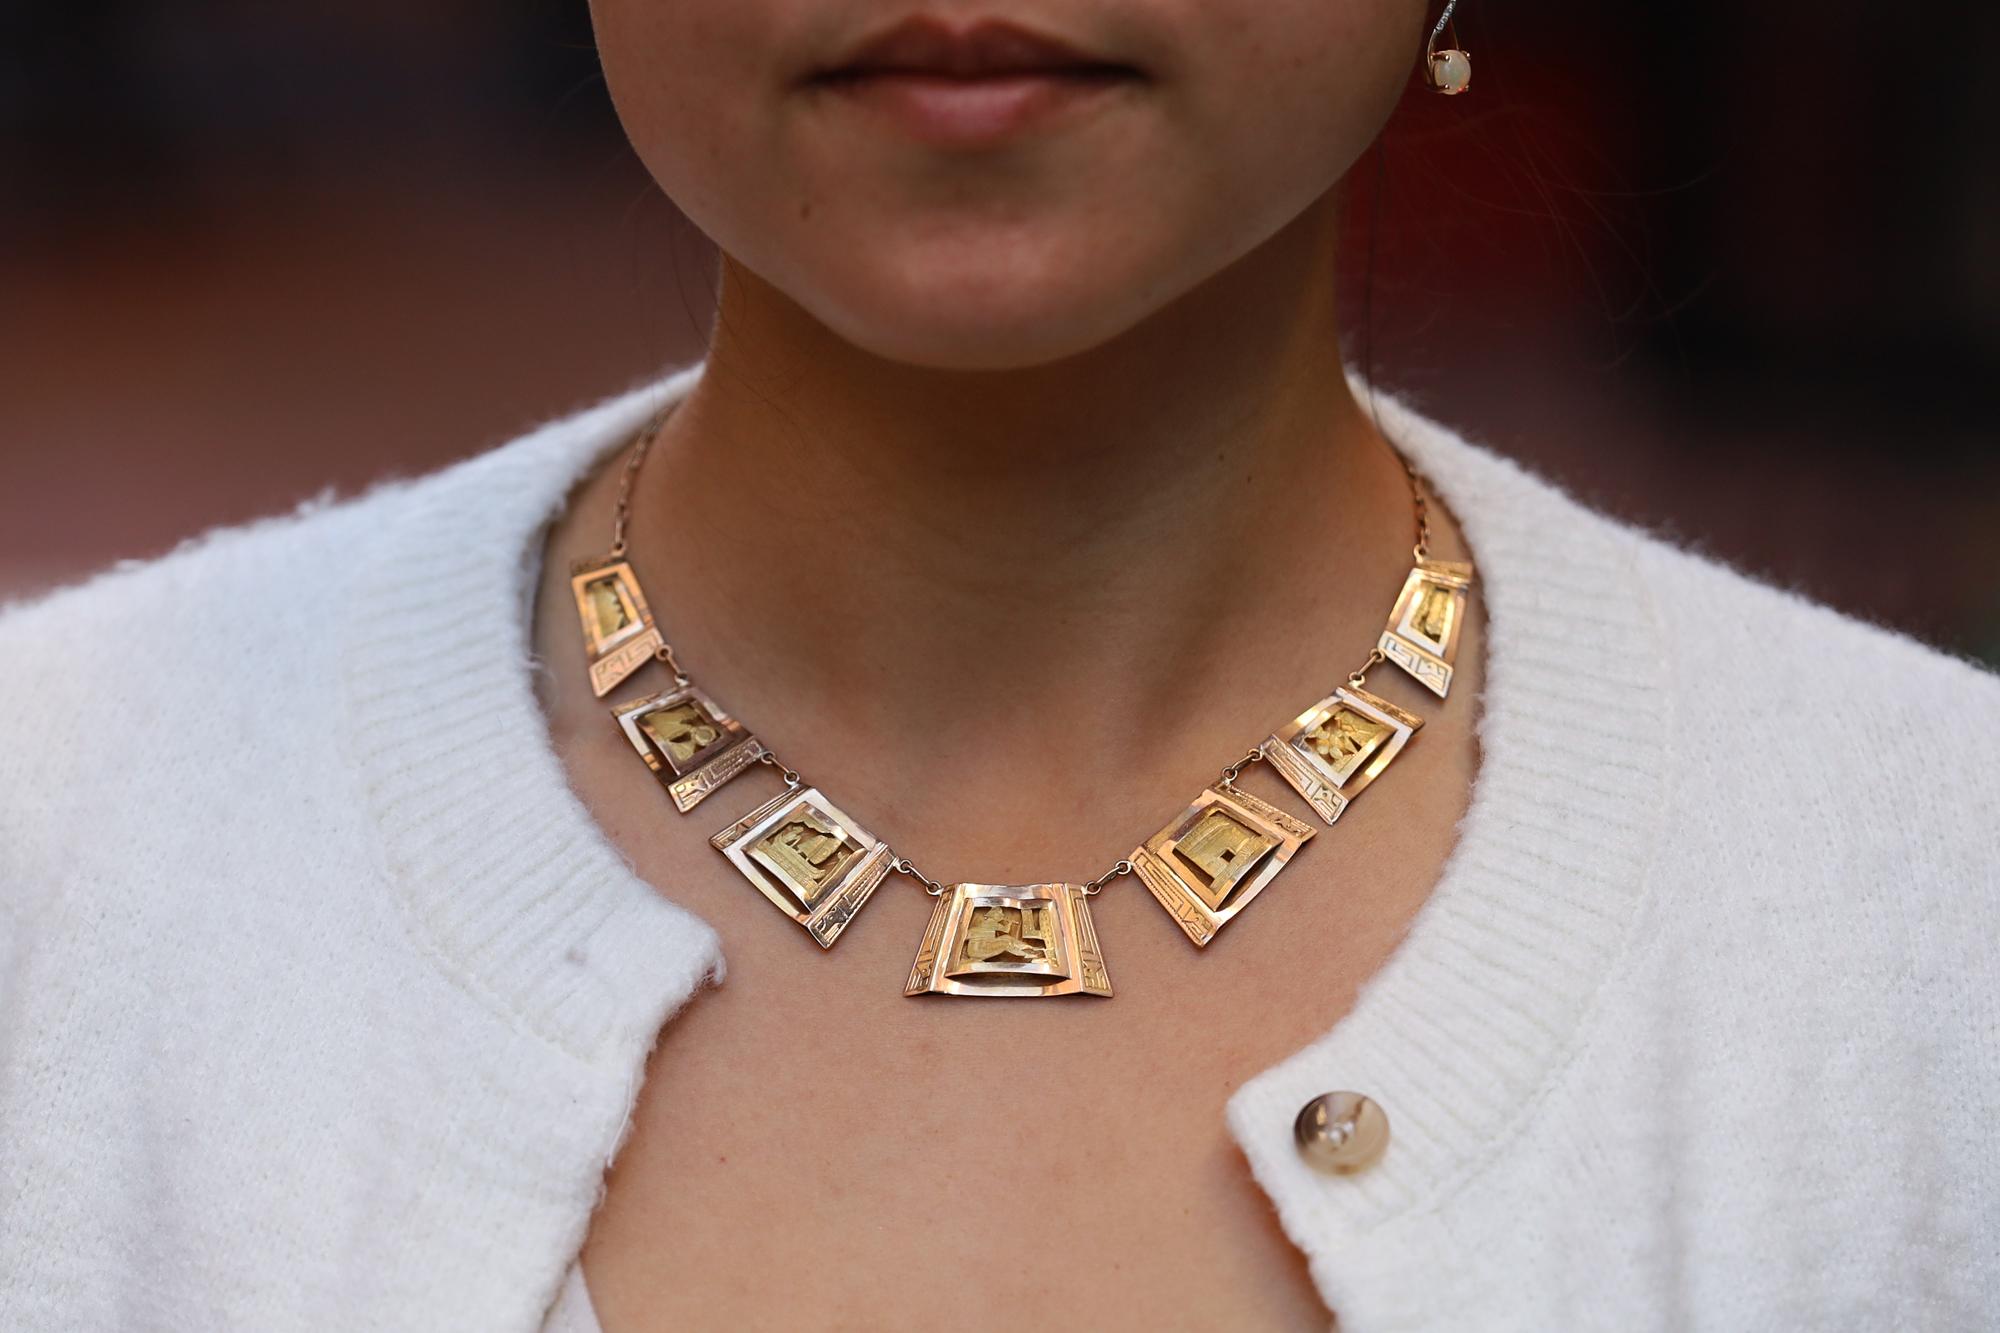 A beautiful and unique discovery, this circa 1950s Peruvian storyteller necklace. It is gorgeously hand crafted of 18k and 20k yellow gold with 7 detailed,  silhouetted stations depicting life in the ancient Mayan culture of Peru. A musician, a